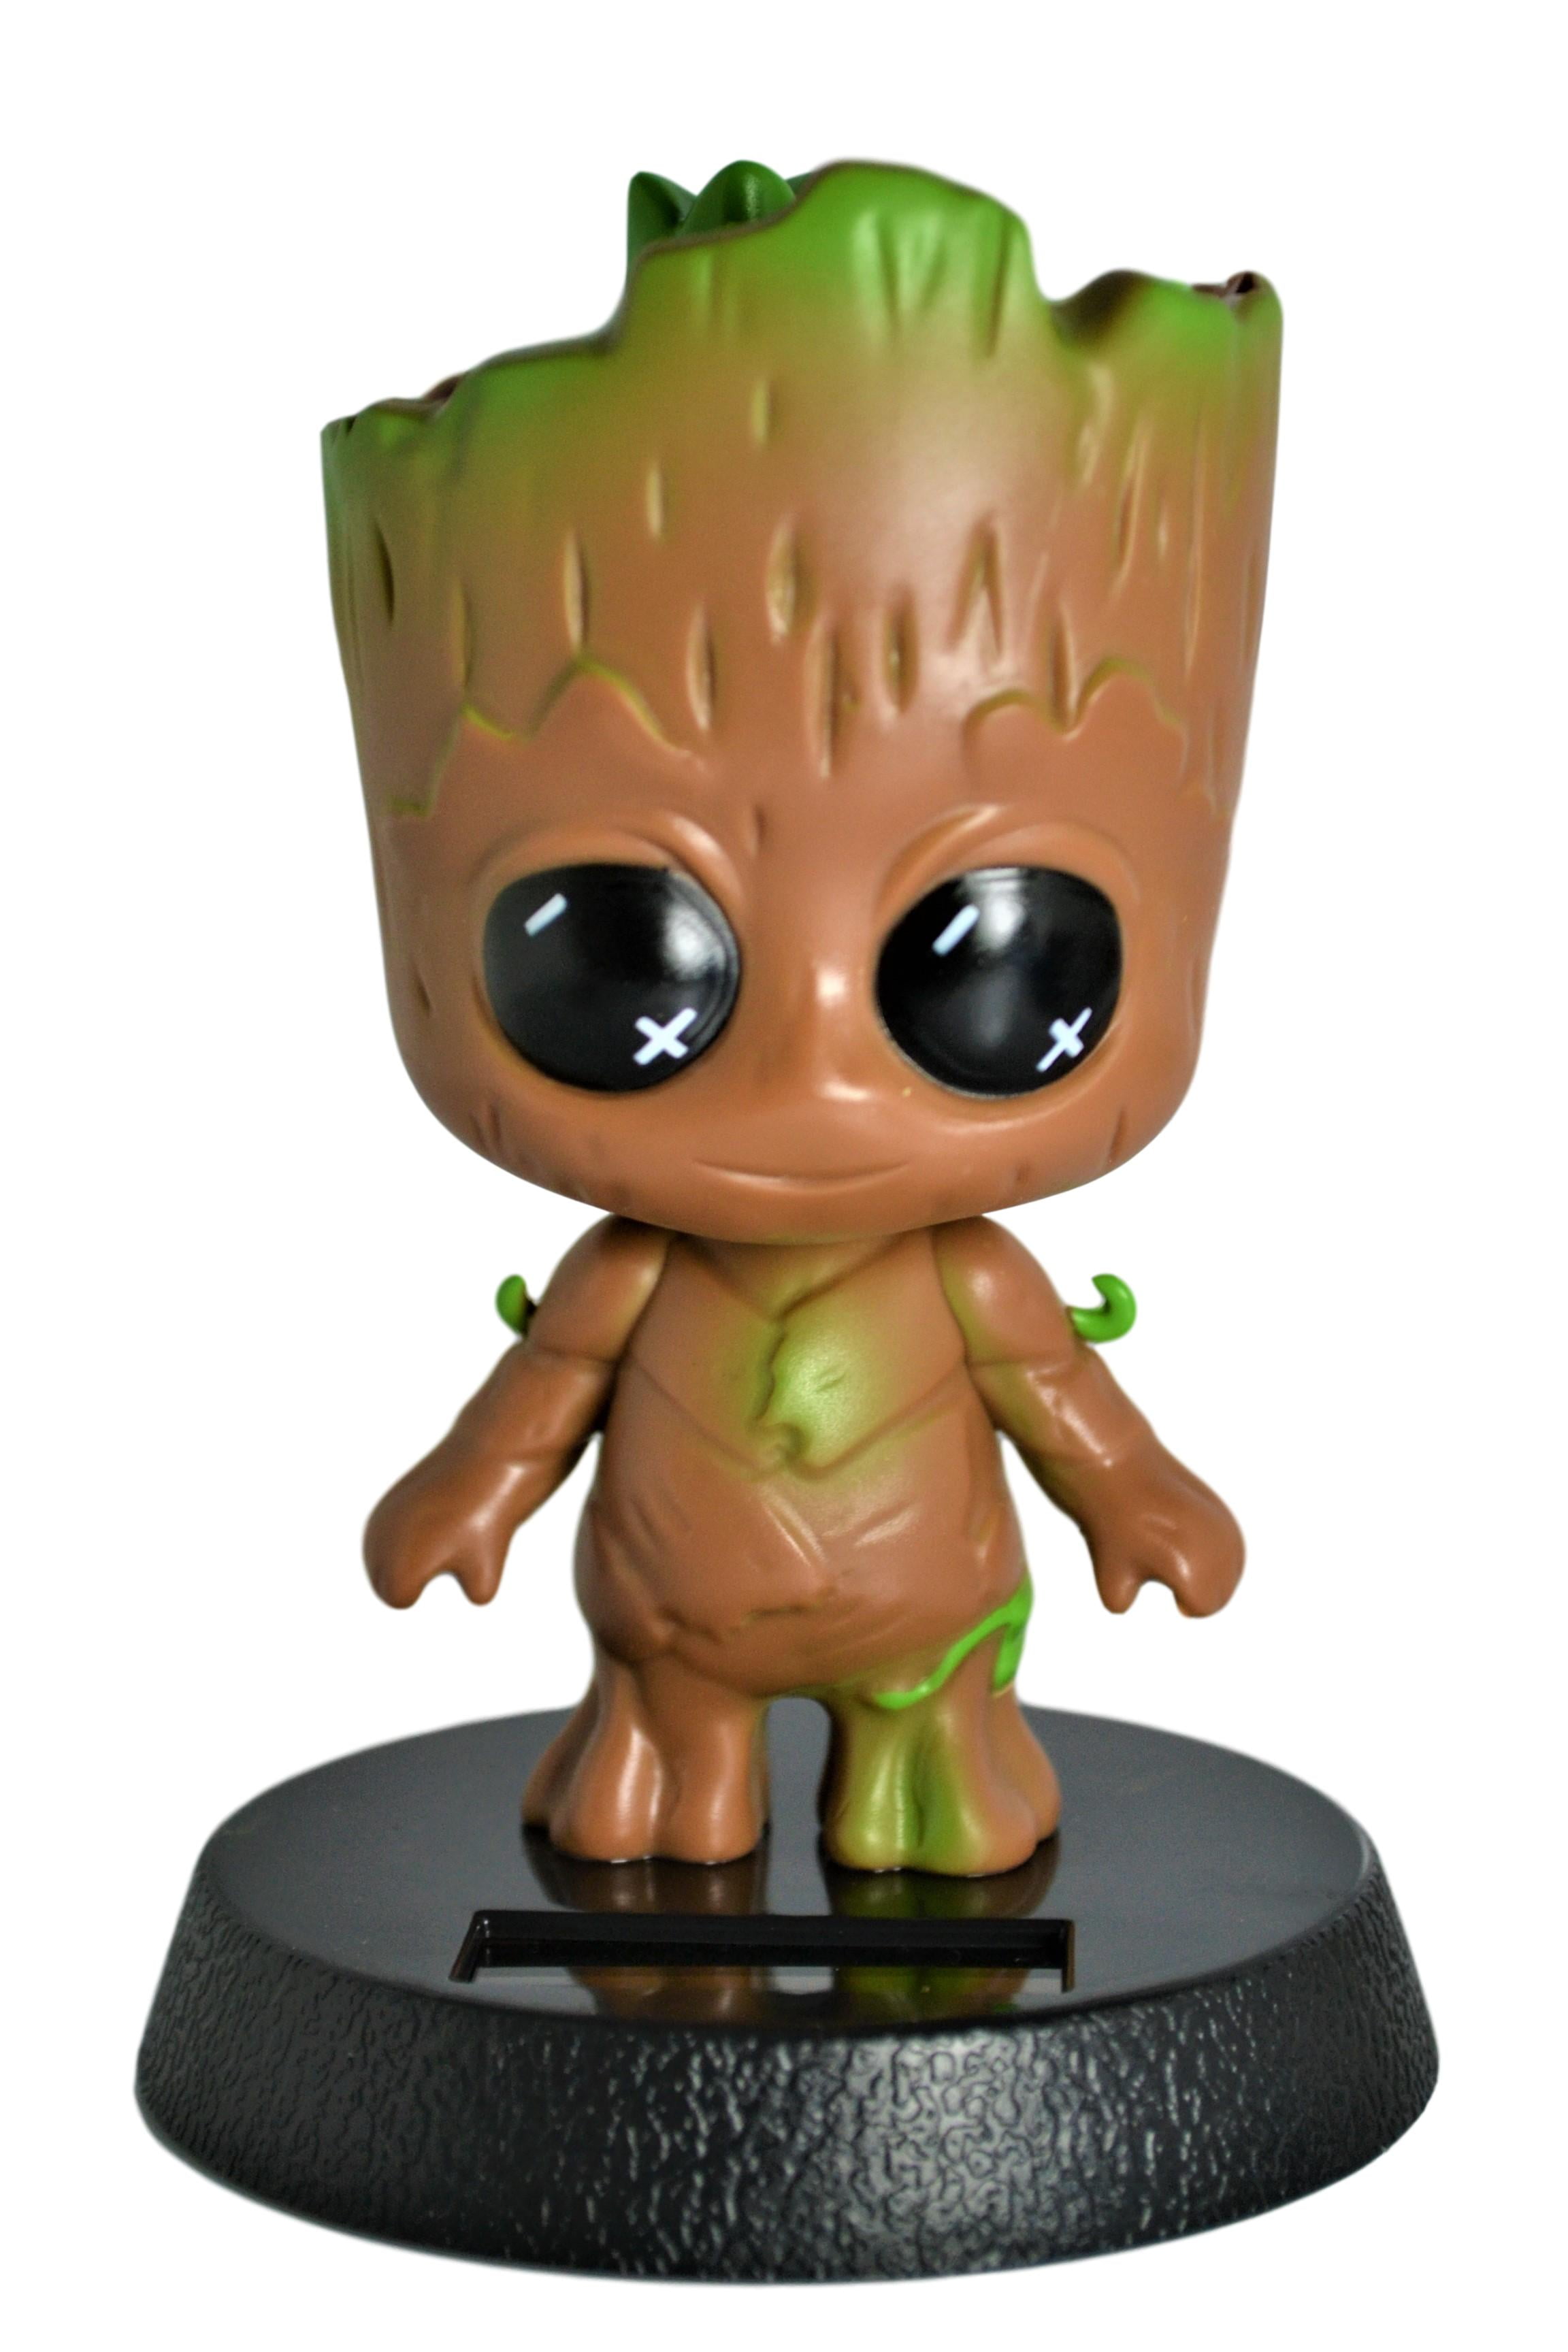 Trendy Baby Groot Hot Guardians of the Galaxy Vinyl Qute Figurine Toy Doll Gift